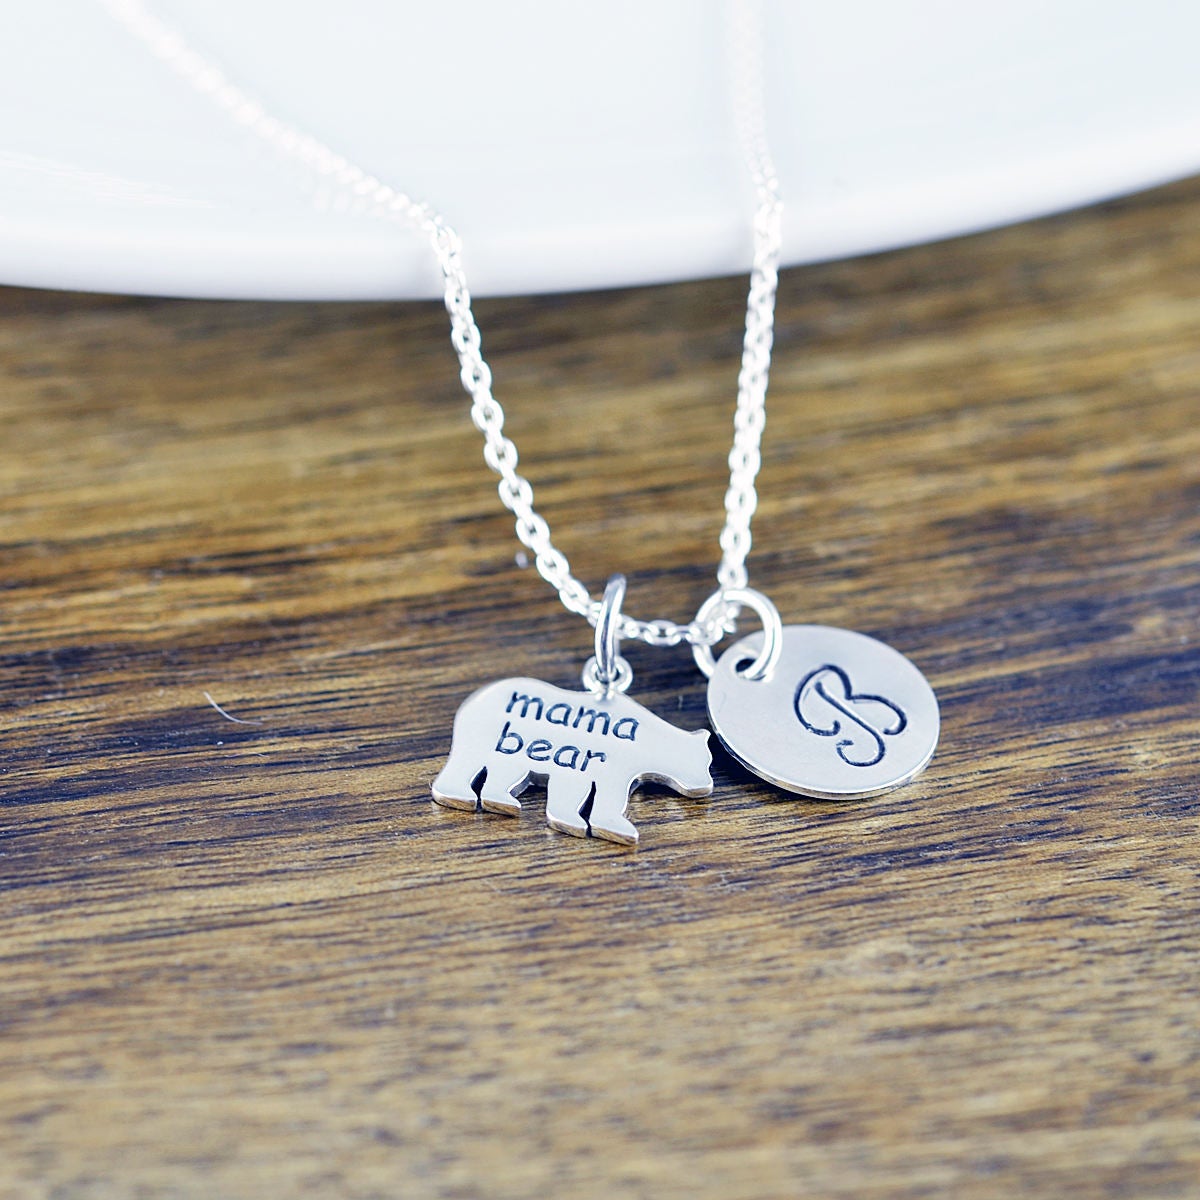 Mama Bear Necklace - Mama Bear Jewelry - Bear Cubs Necklace - Mama Bear Cub Jewelry - Mothers Necklace - Mom Necklace - Mothers Gift